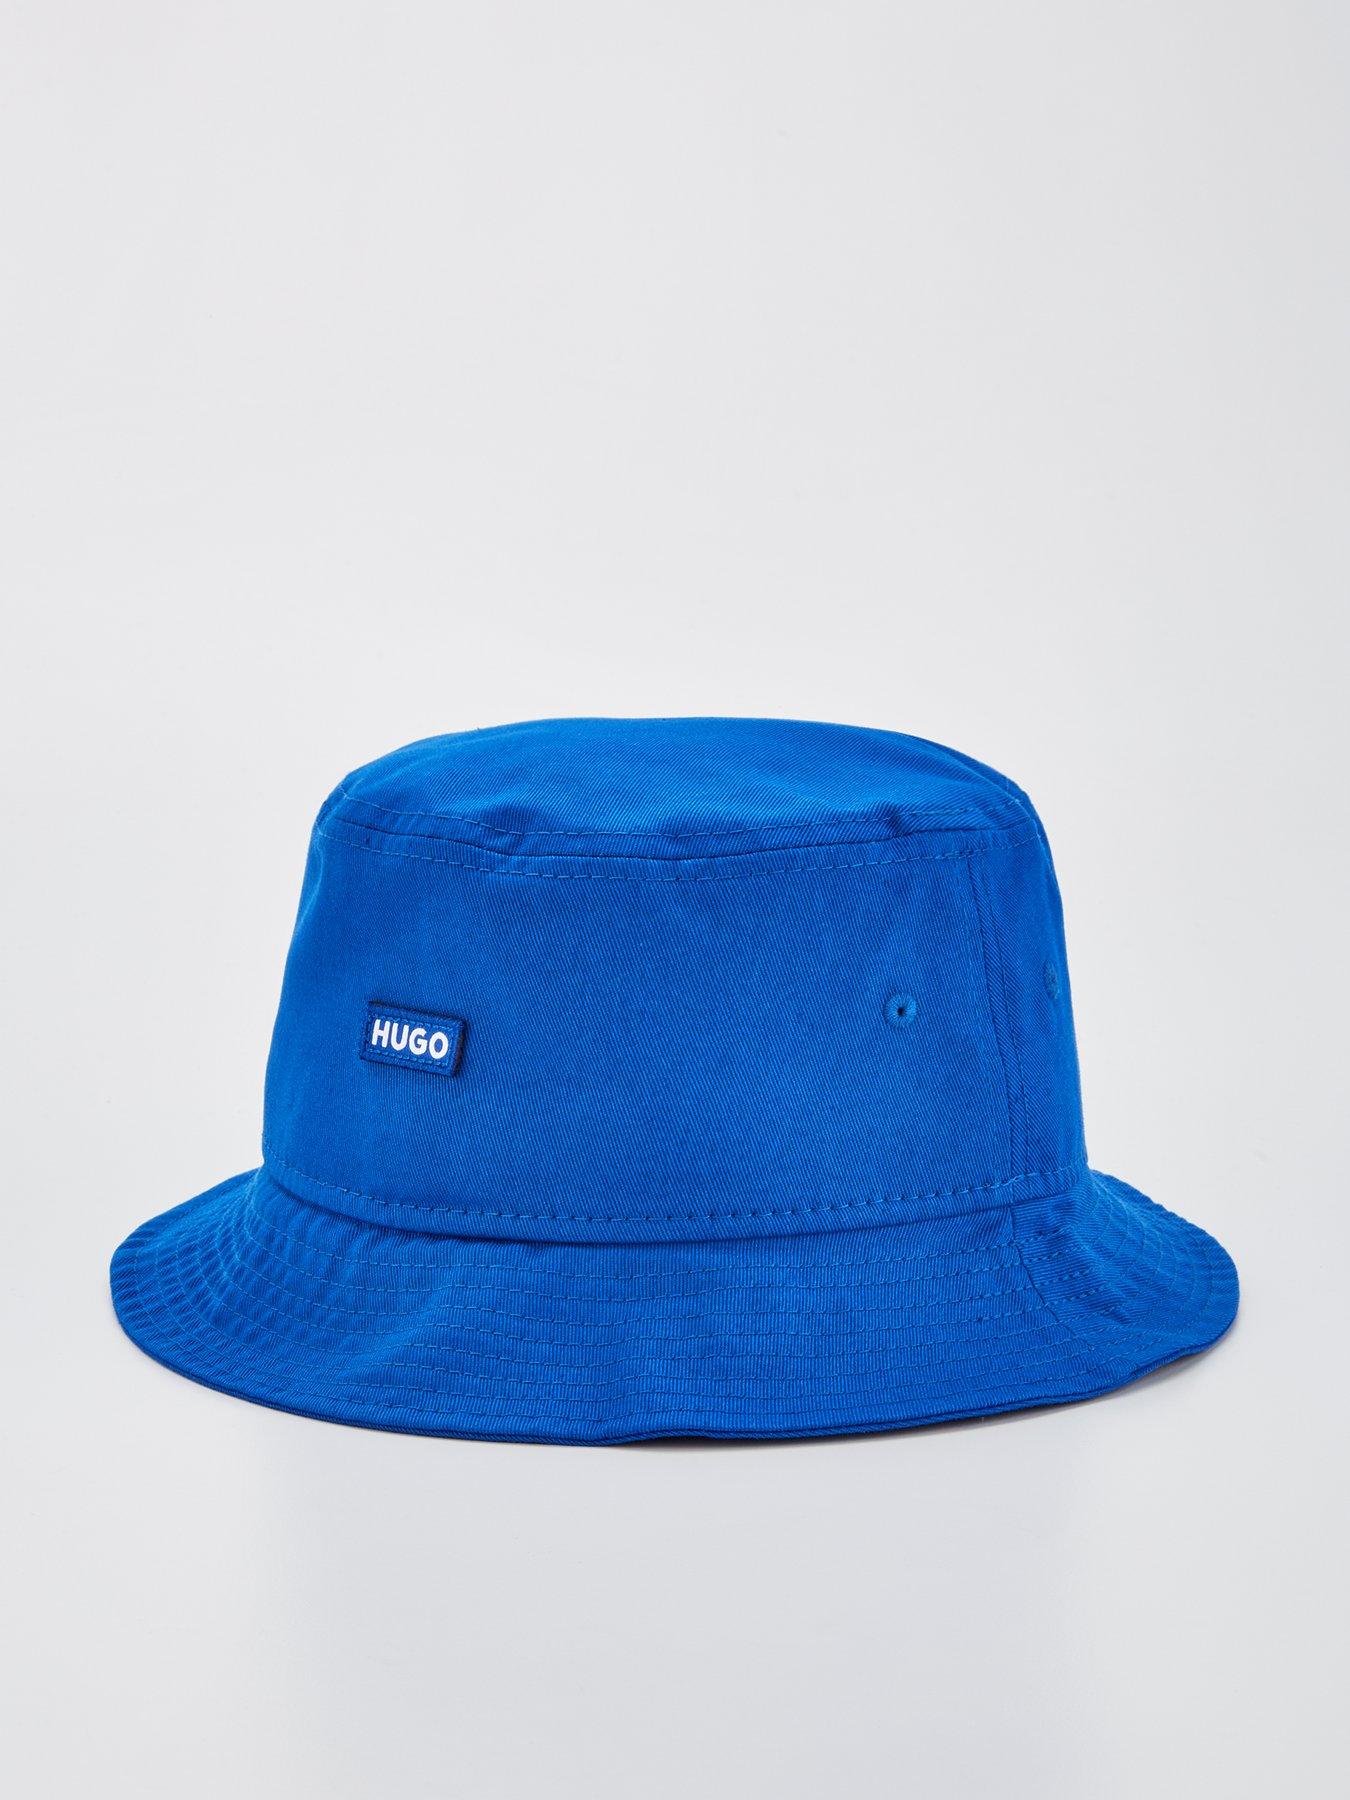 Bucket Hat for Men Women Bear Paw Embroidered Washed Cotton Unisex Bucket  Hats